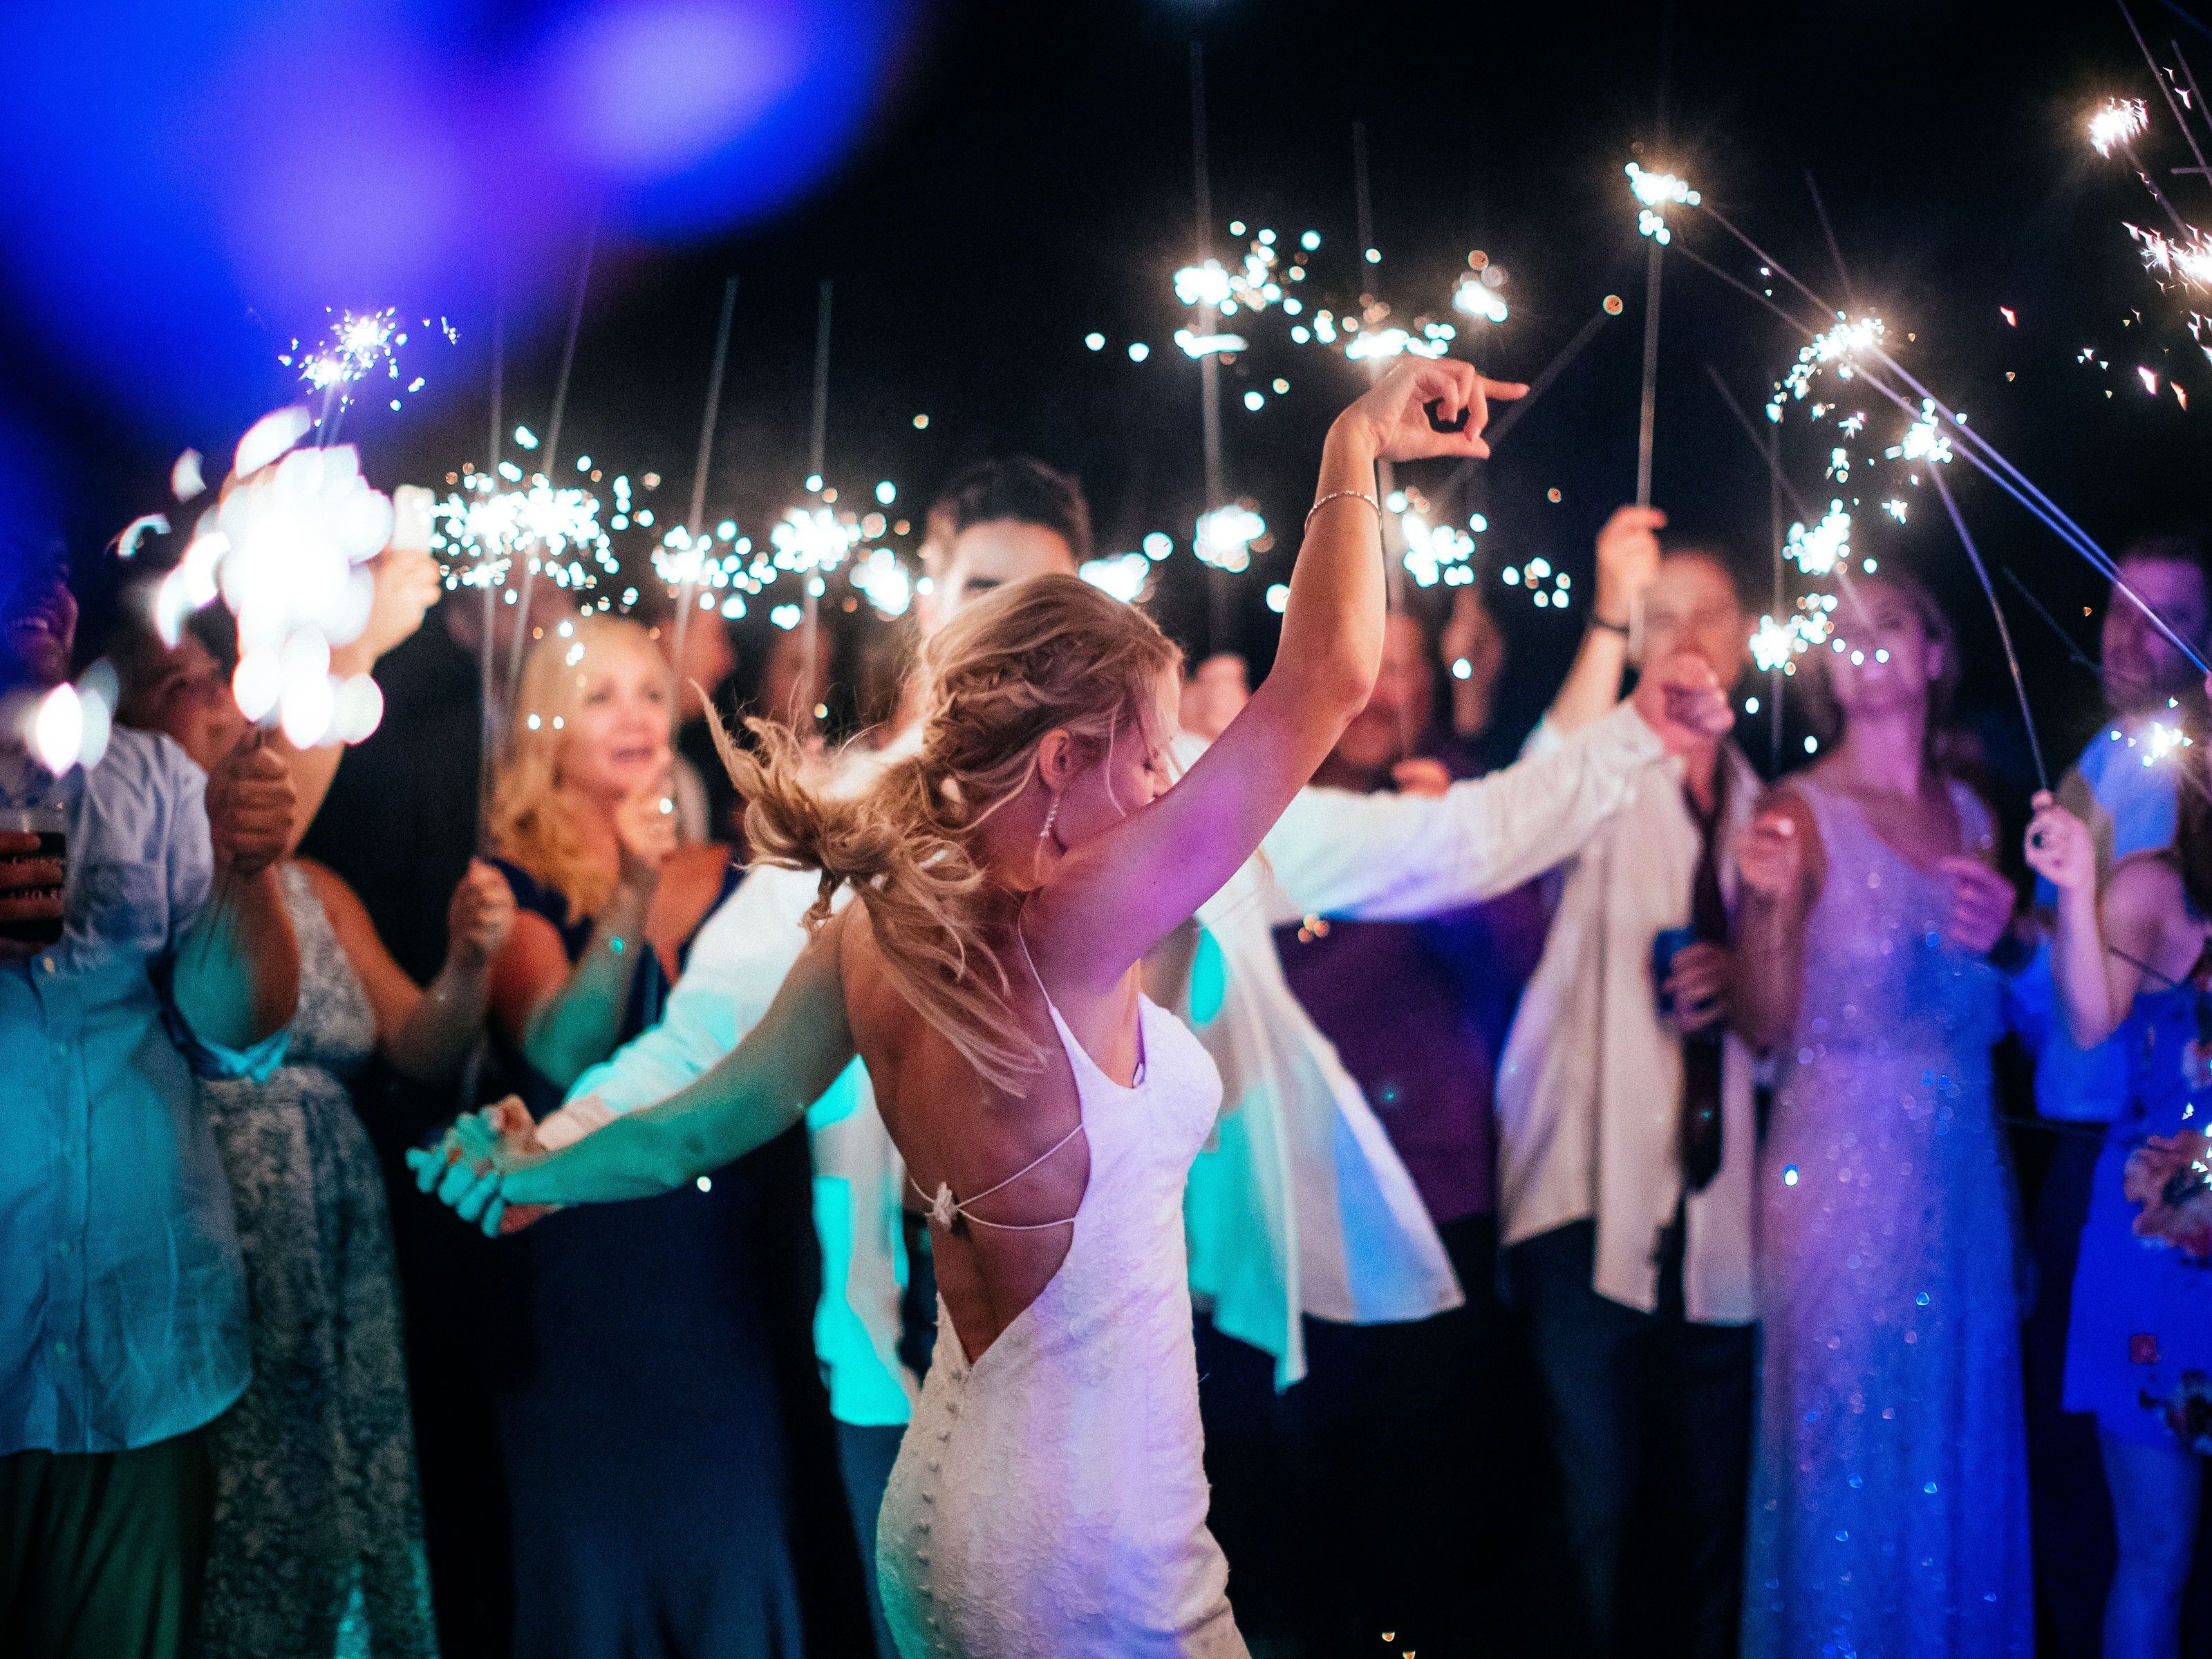 Bride and groom dancing while guests celebrate with sparklers